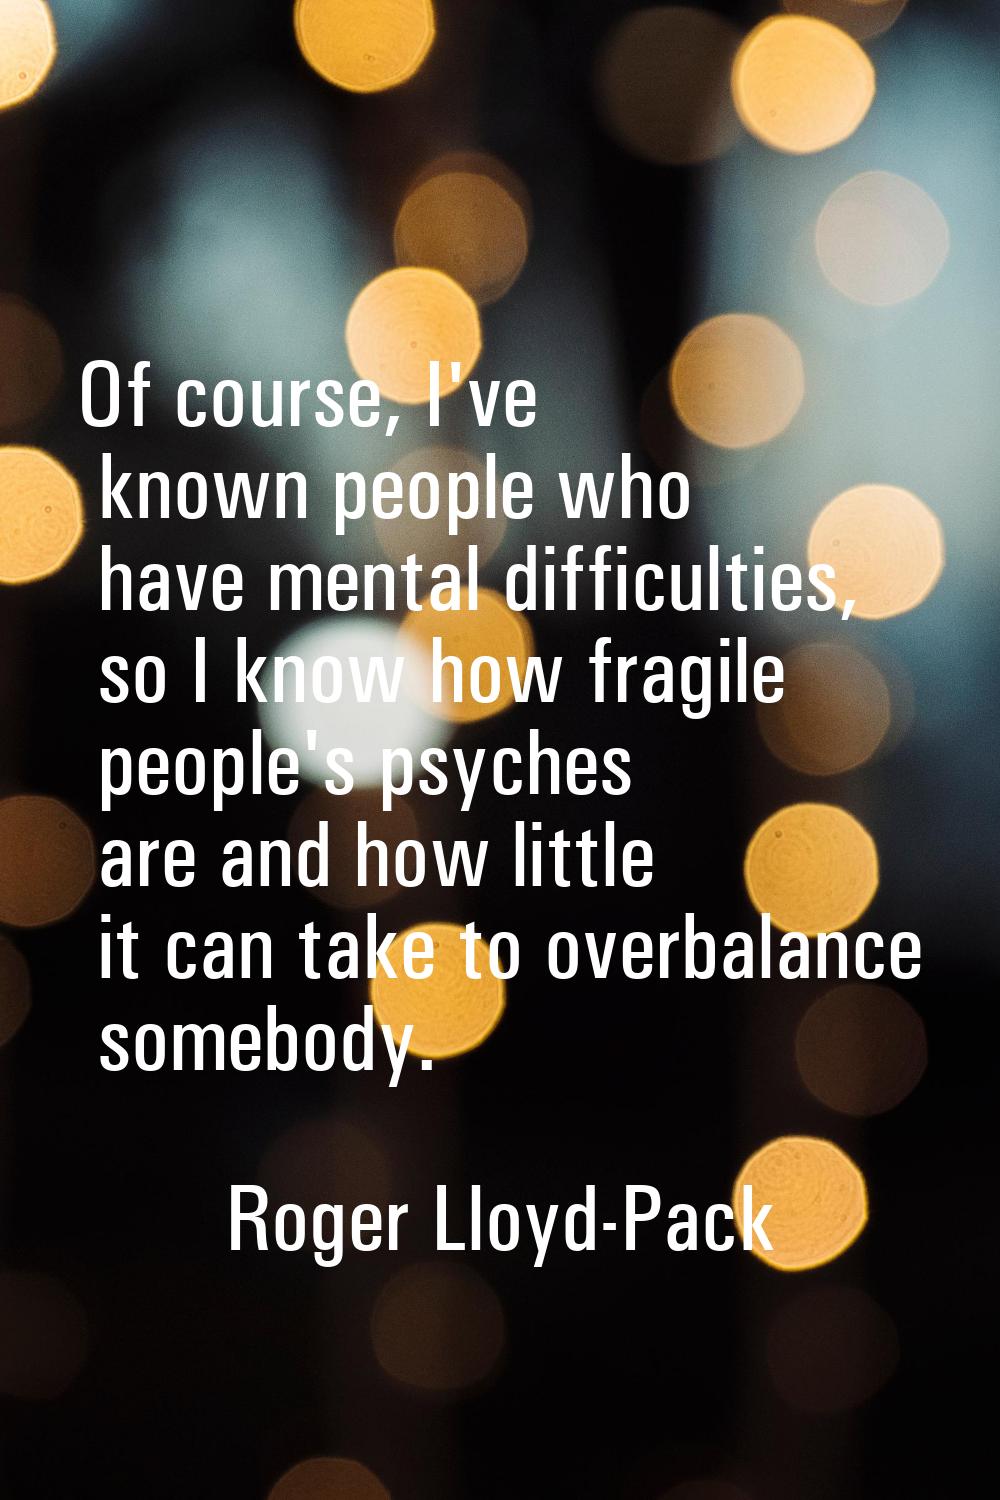 Of course, I've known people who have mental difficulties, so I know how fragile people's psyches a